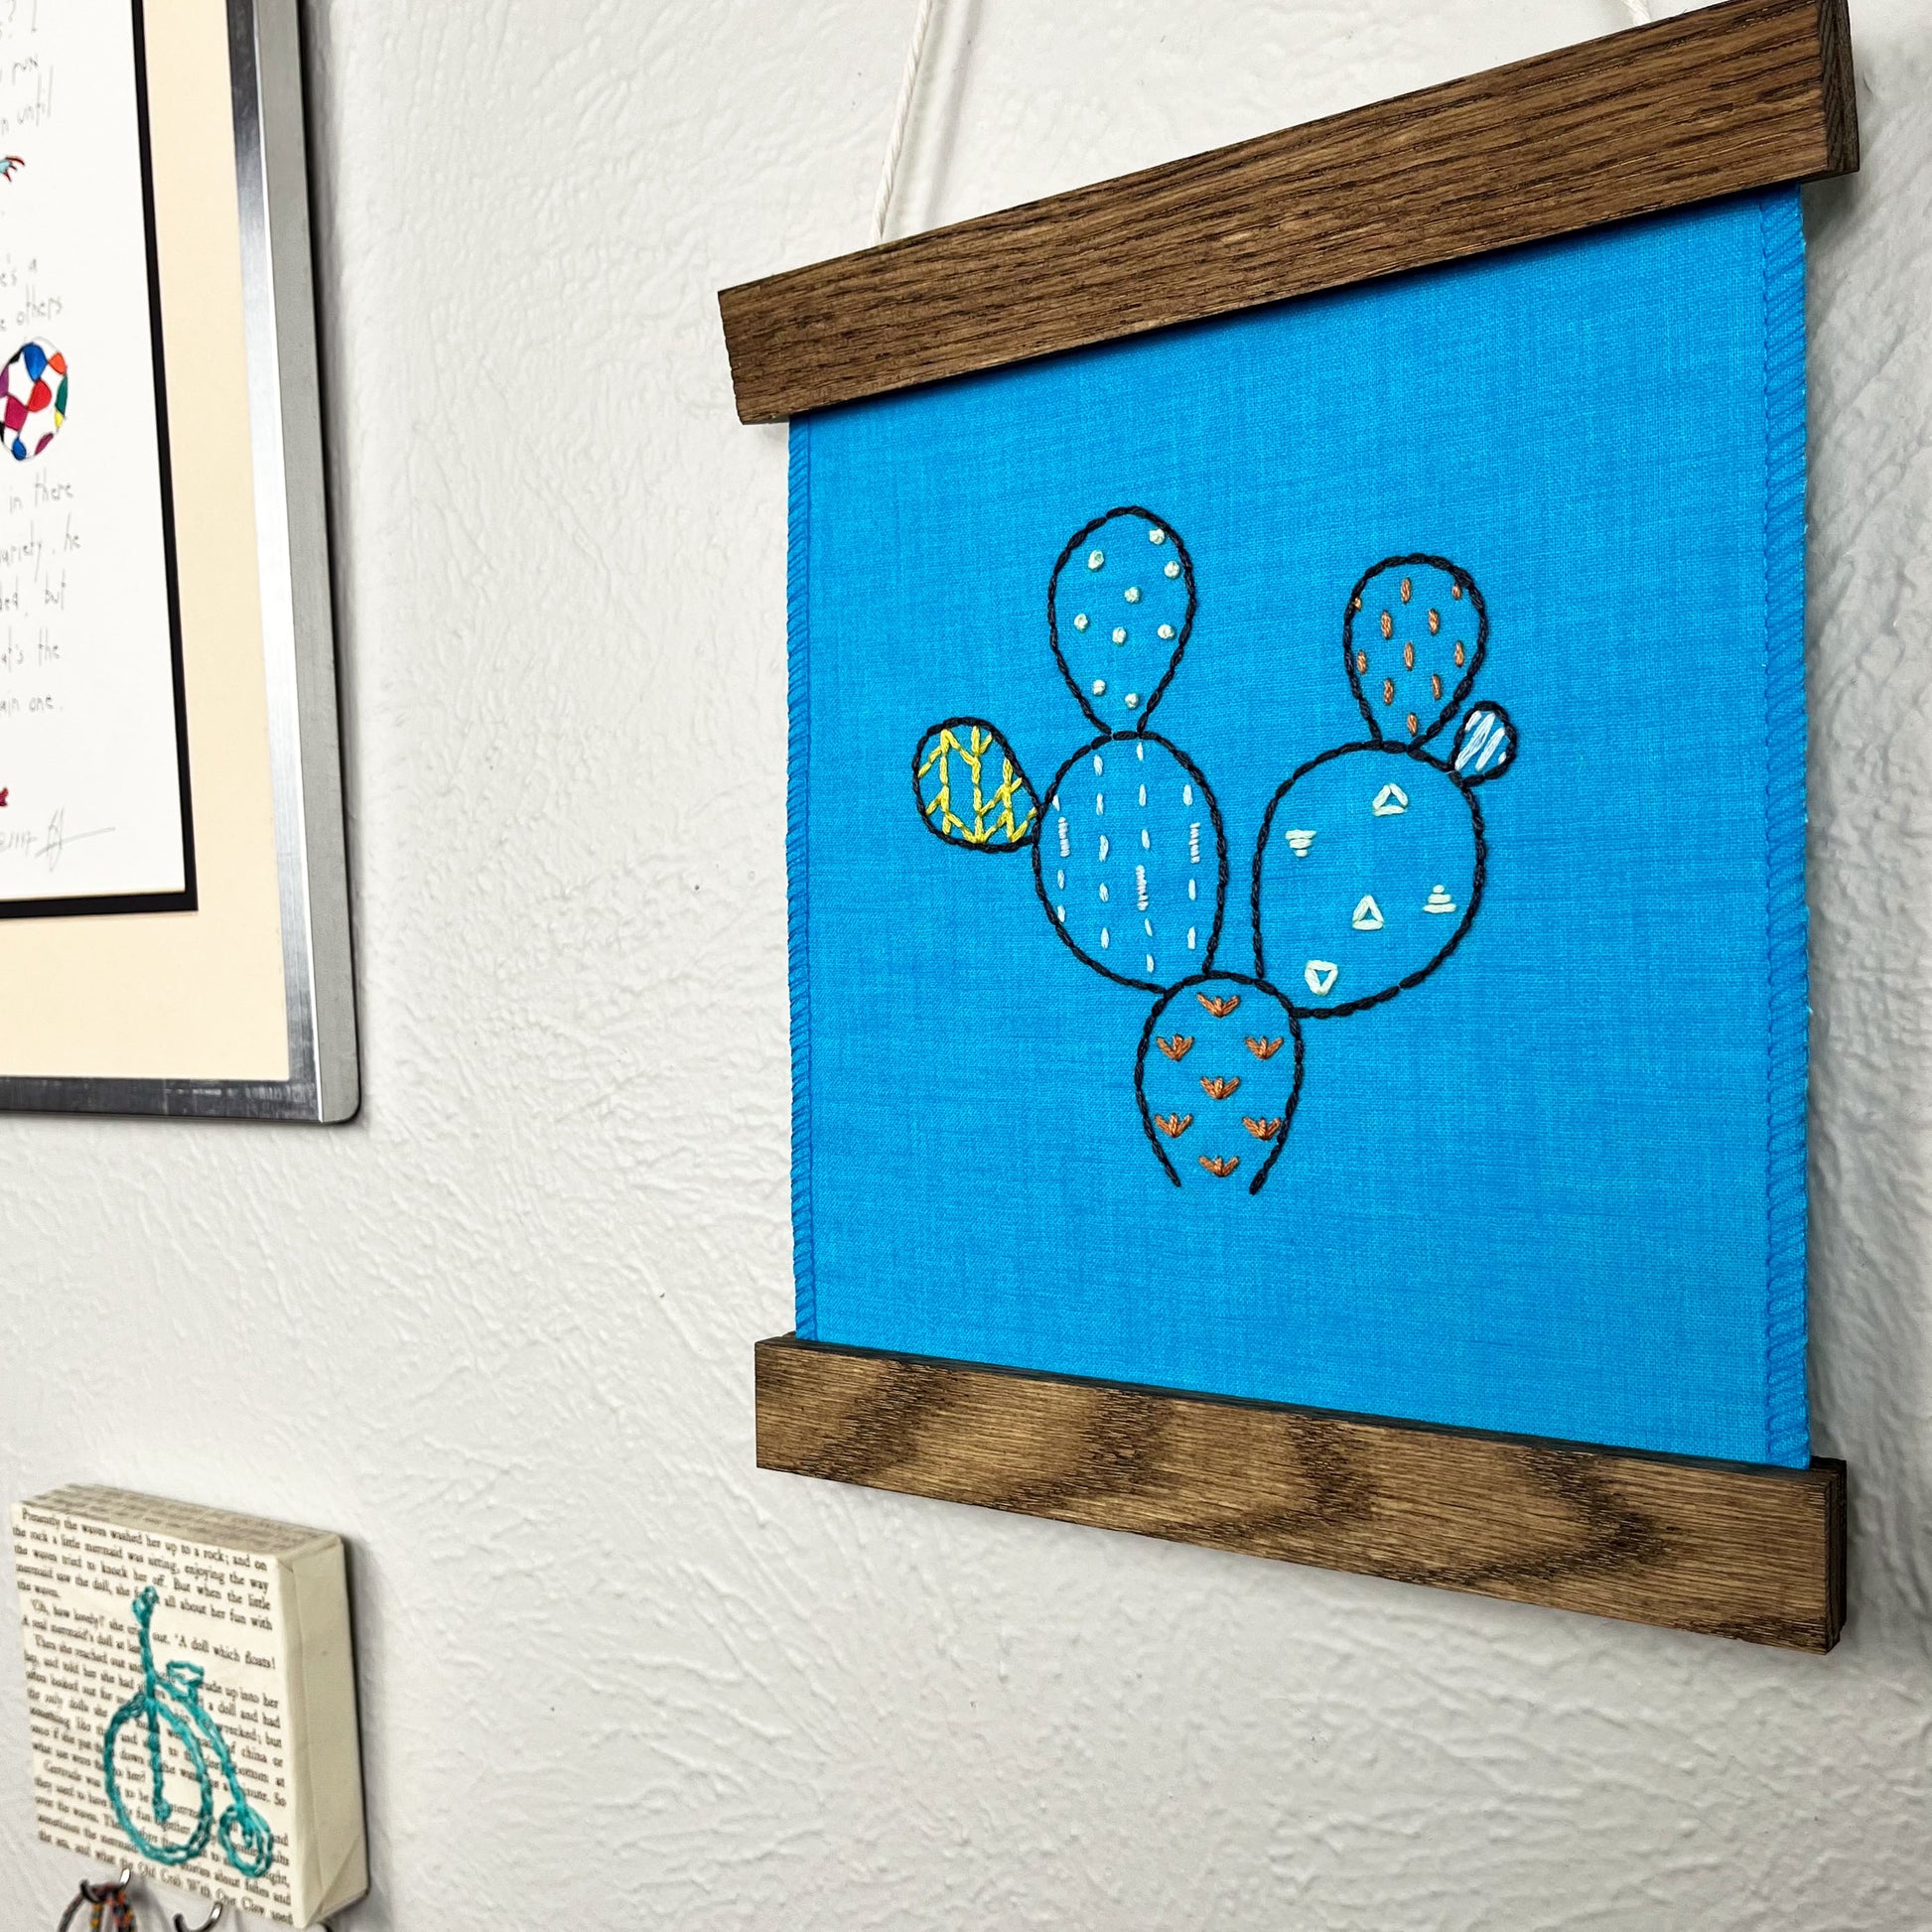 a small bright blue fabric wall hanging in a magnetic wood frame, hand embroidered with the outline of a prickly pear cactus in dark blue, each pad filled with different stitches in different colors, hanging on a wall near other artwork